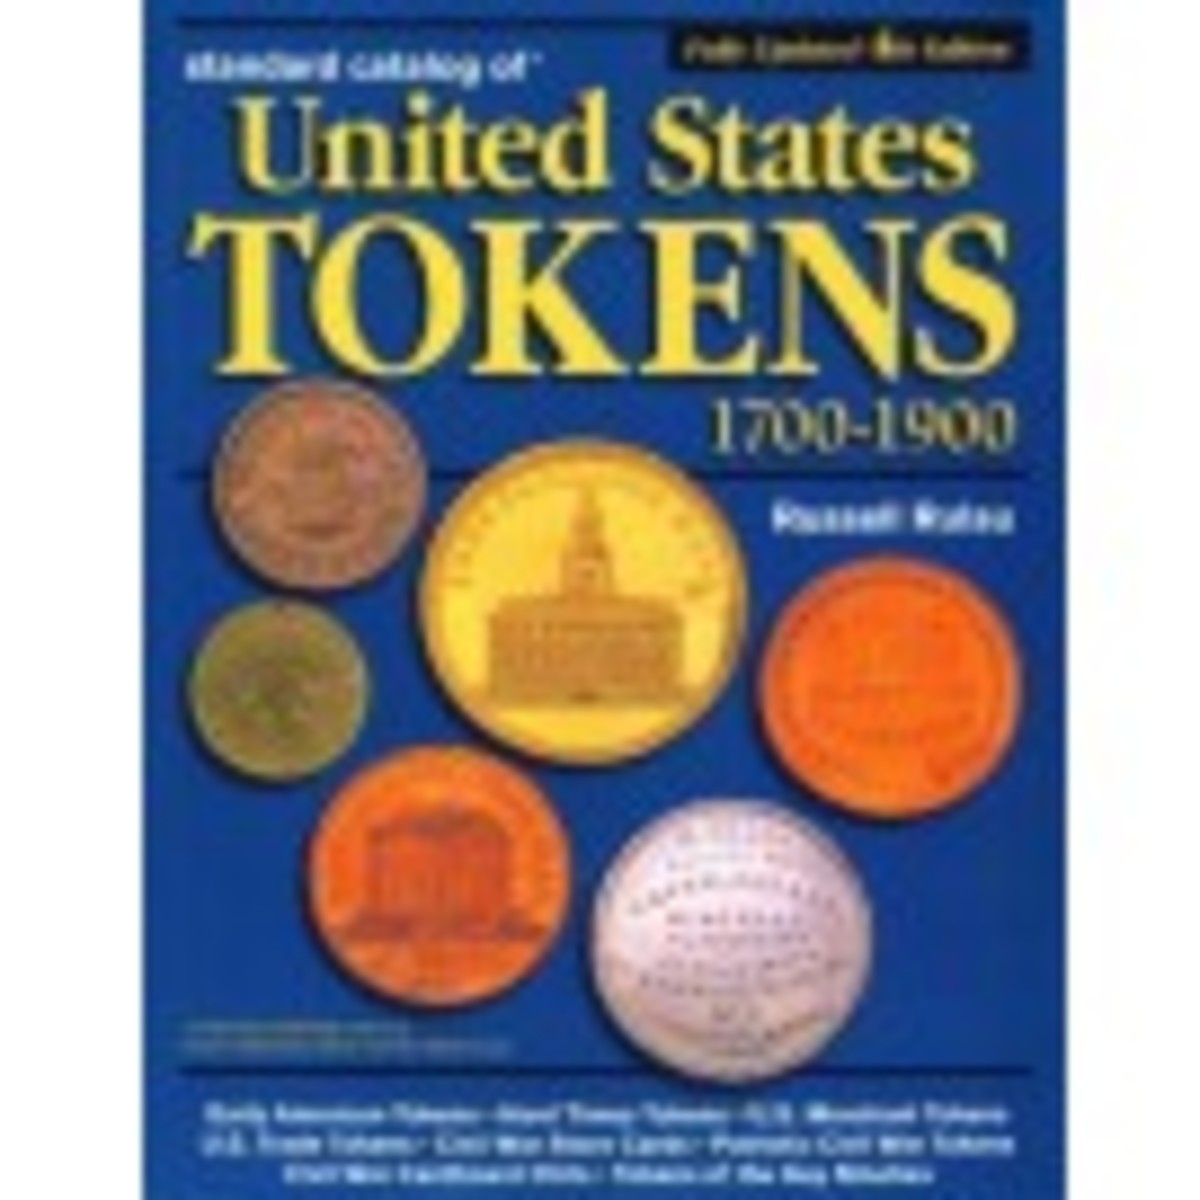 Standard Catalog of United States Tokens Download